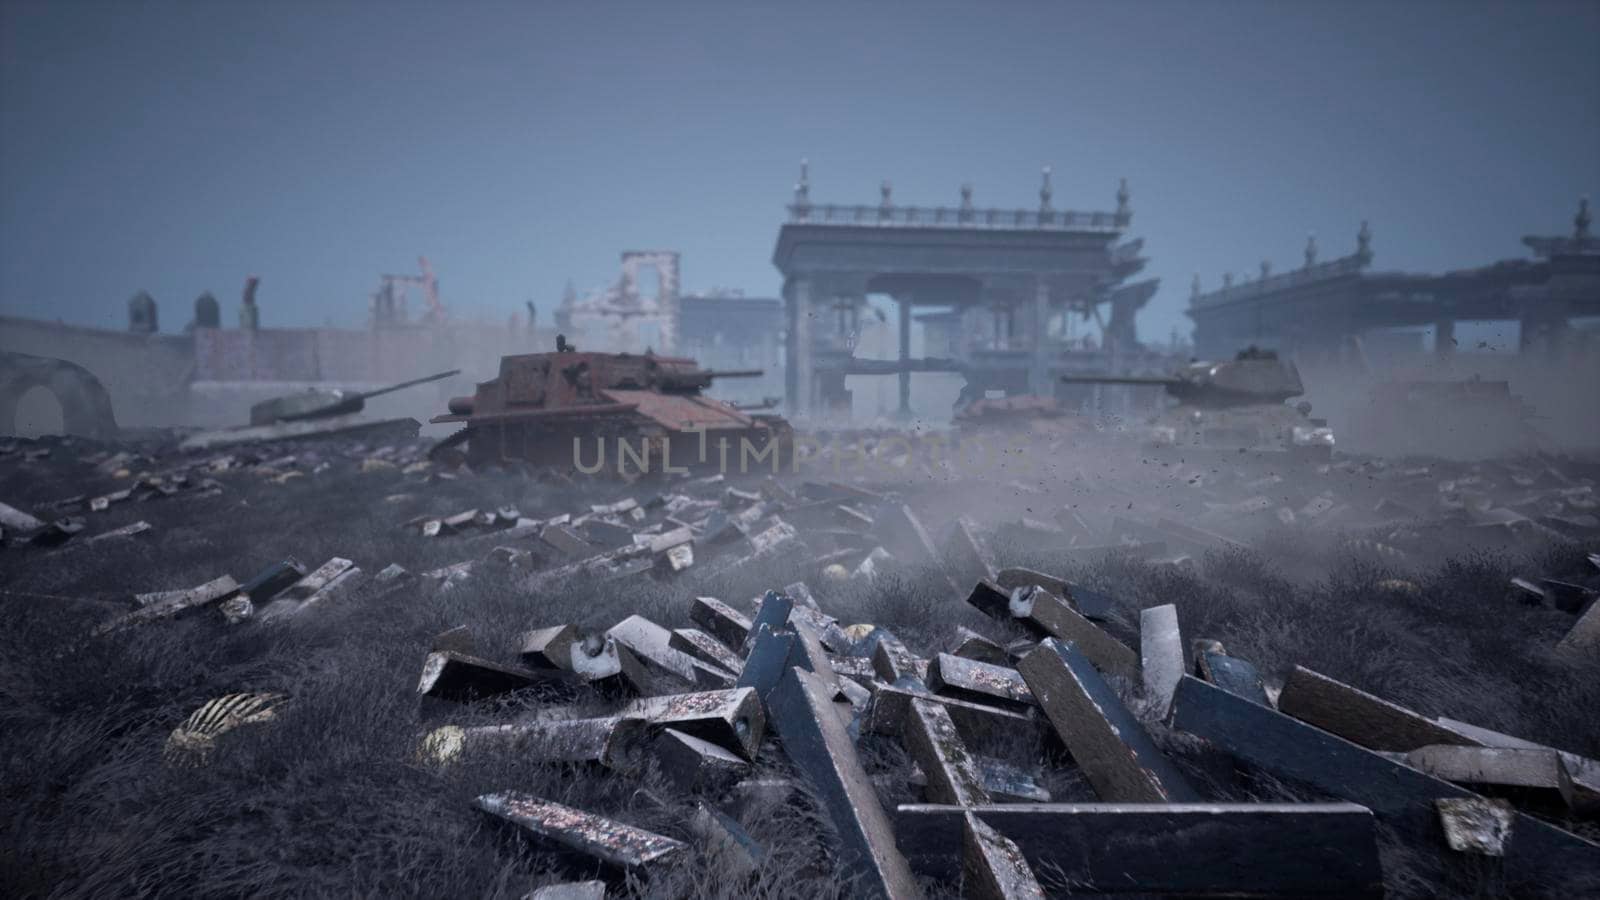 Military tanks from the second world war lie smashed on the battlefield next to human remains and the ruins of houses. The concept of war and the Apocalypse. 3D Rendering by designprojects